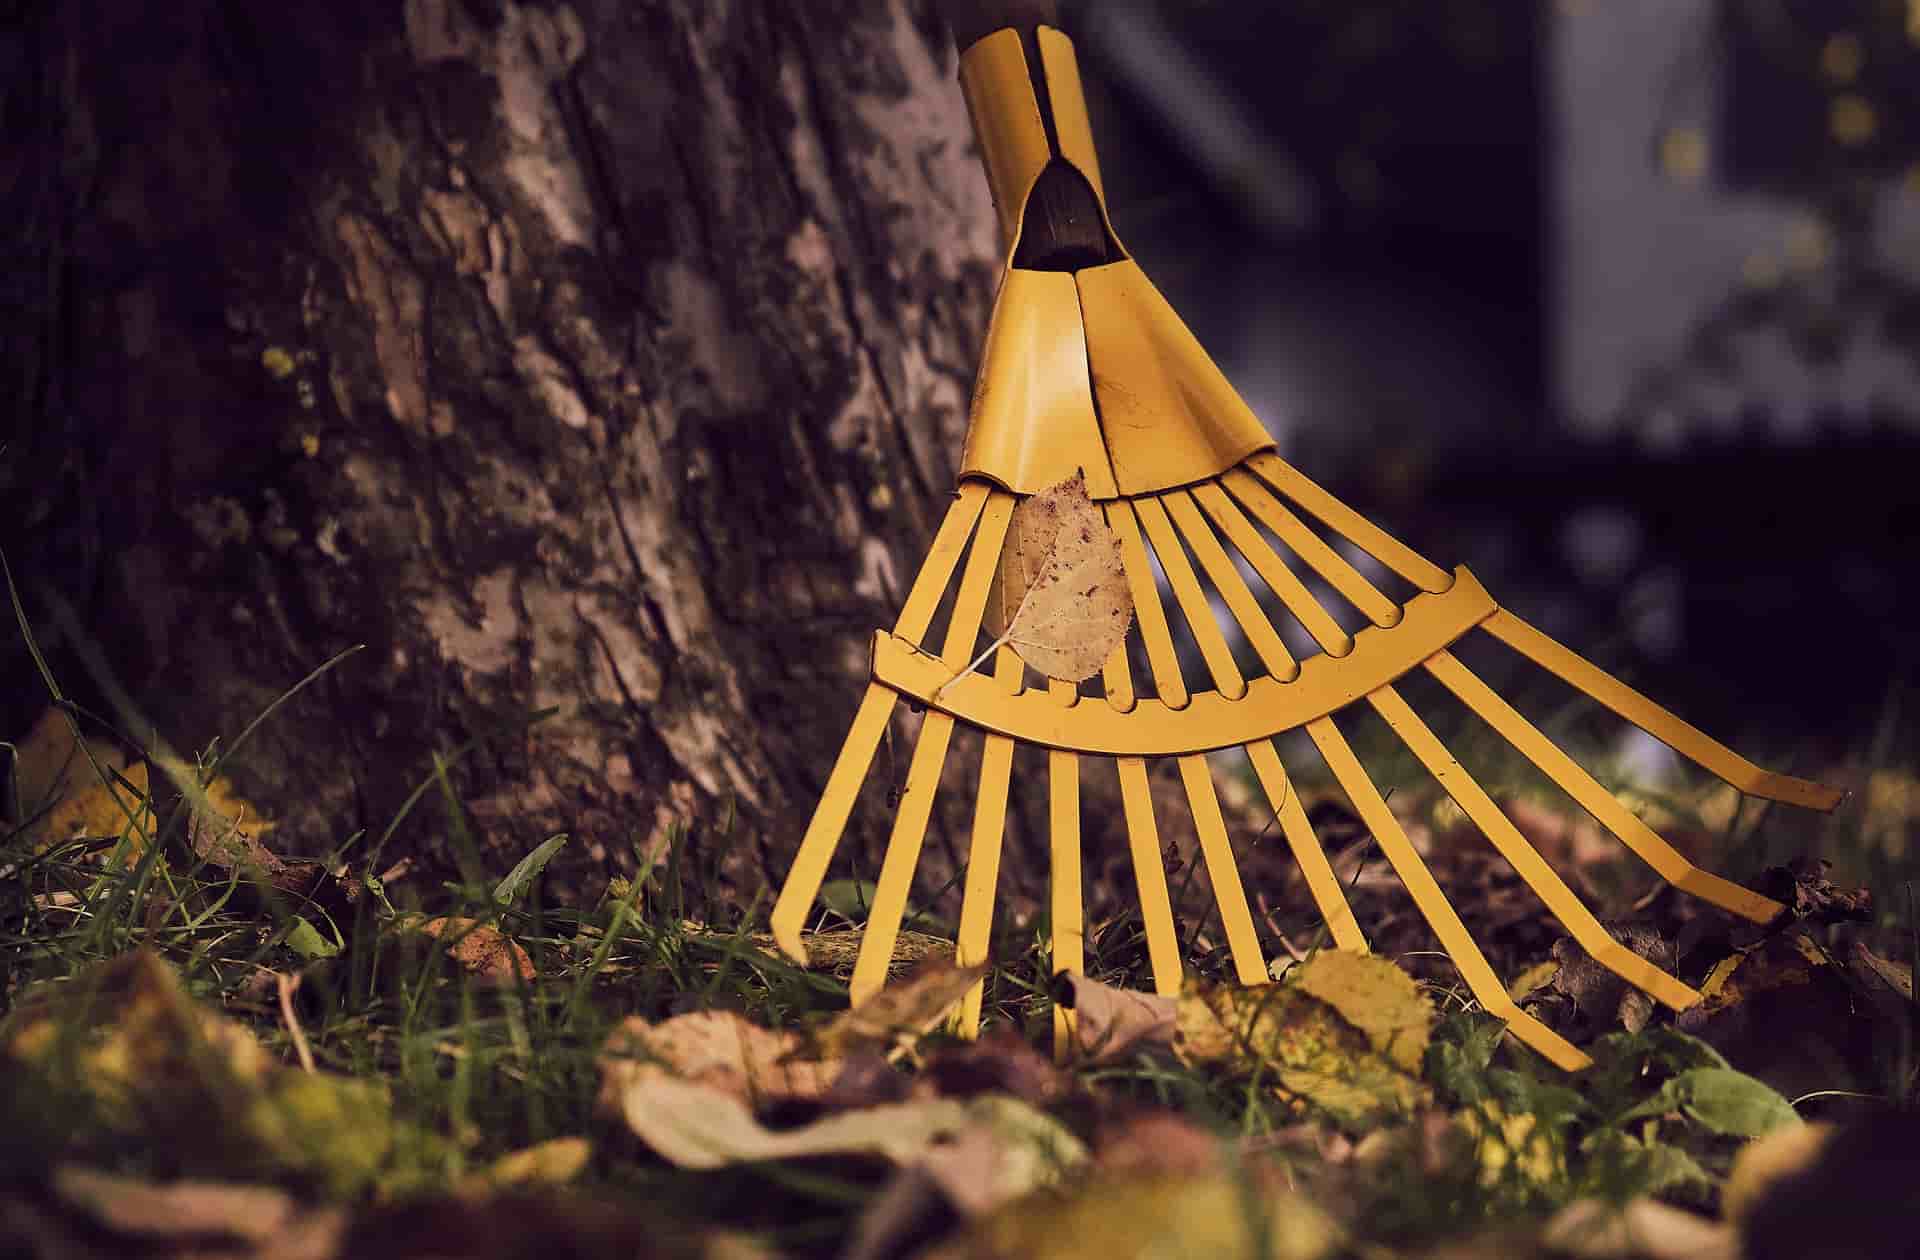 A garden rake propped up against a tree with autumn leaves on the ground